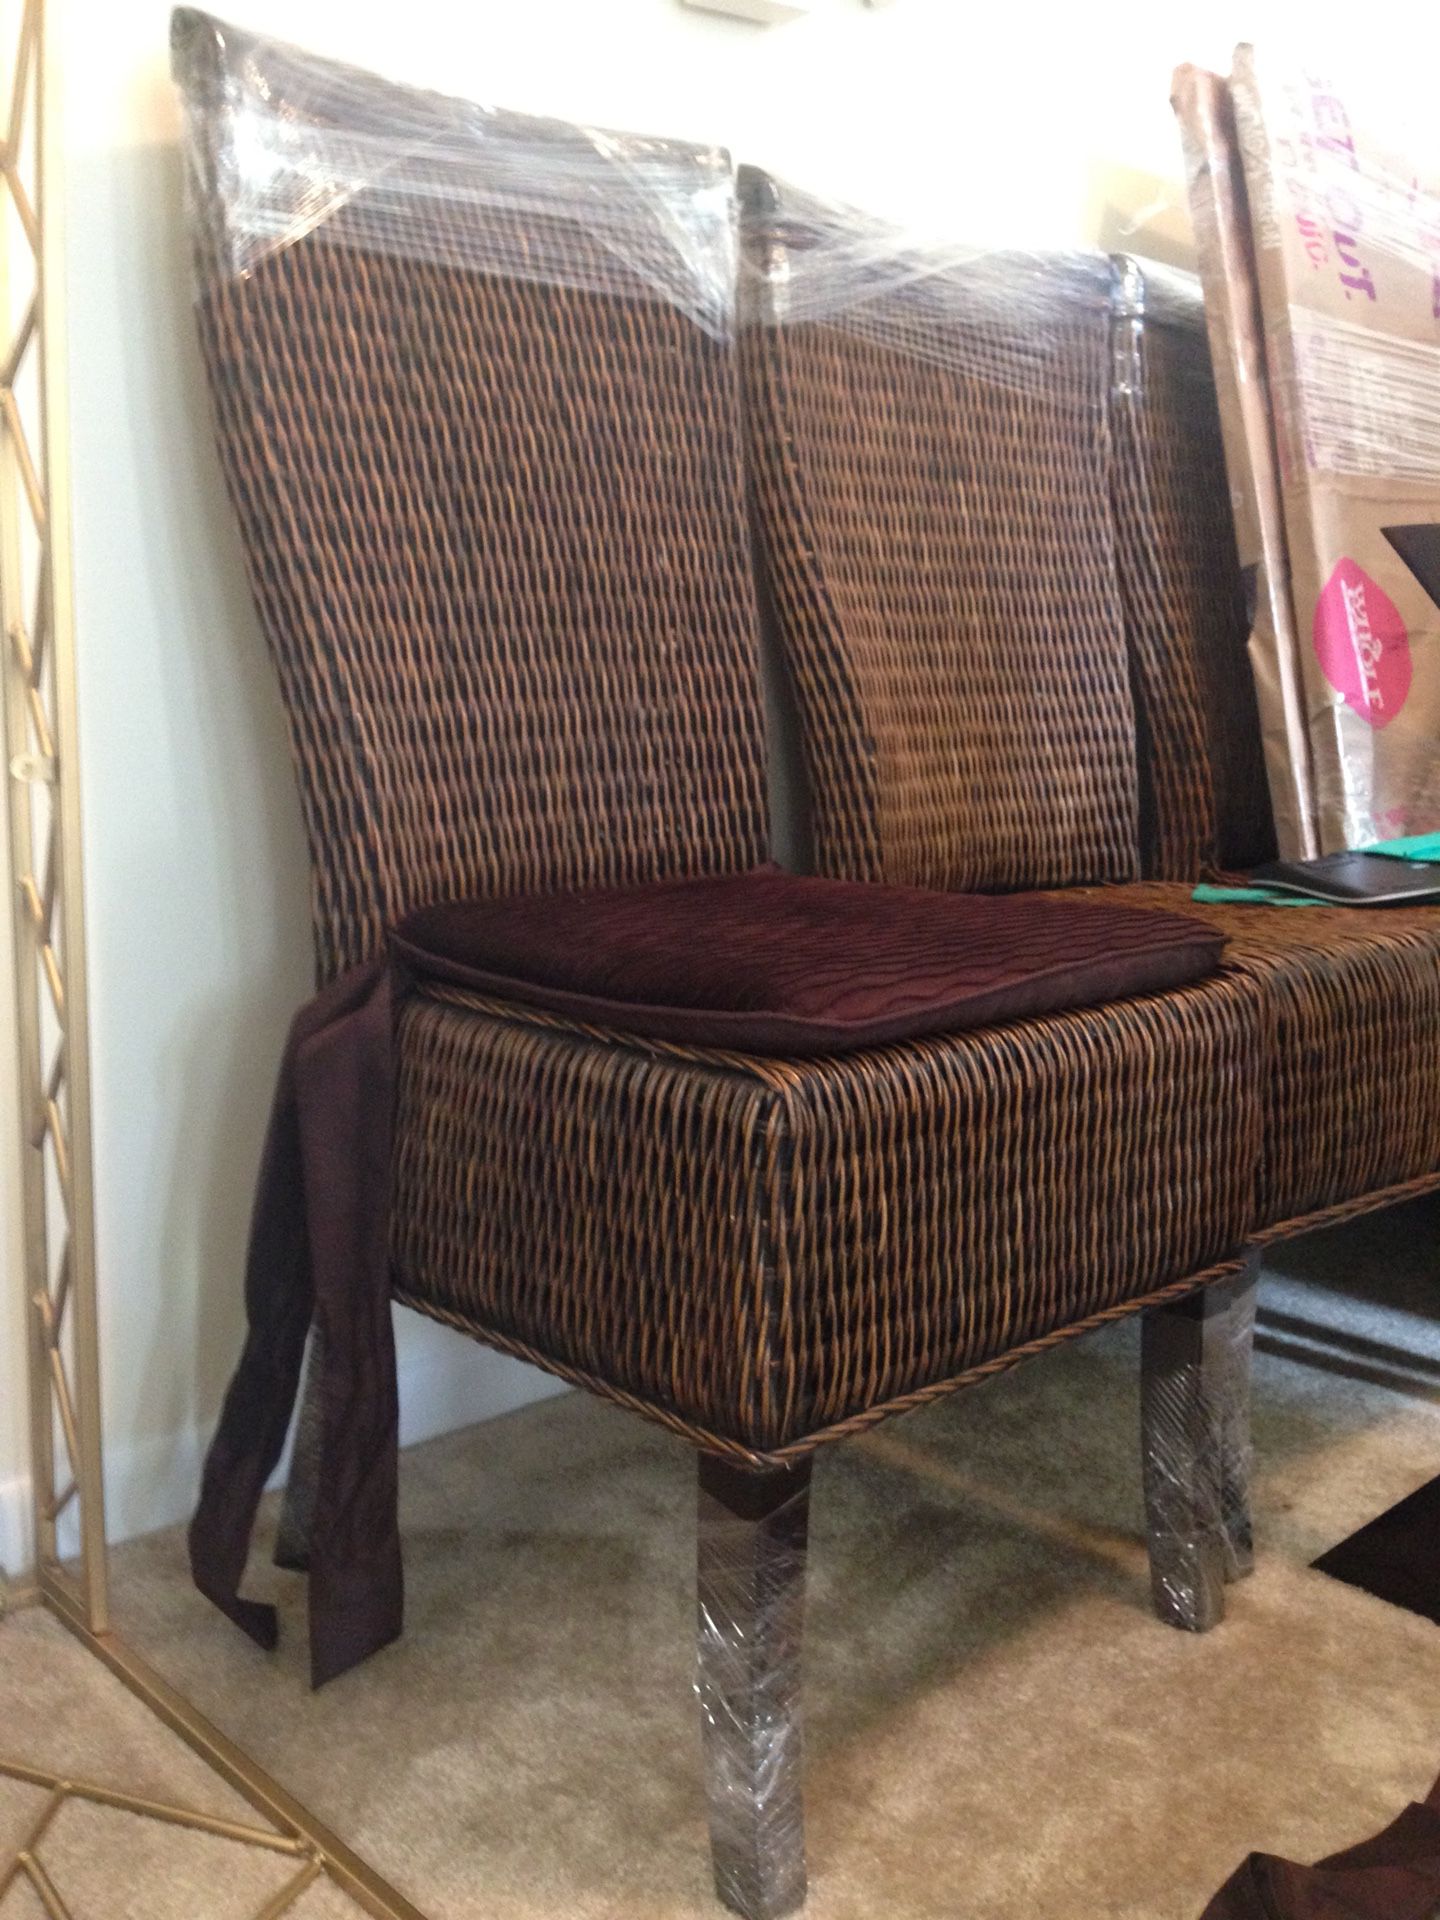 Pier 1 Imports Brown Rattan Dining Chairs